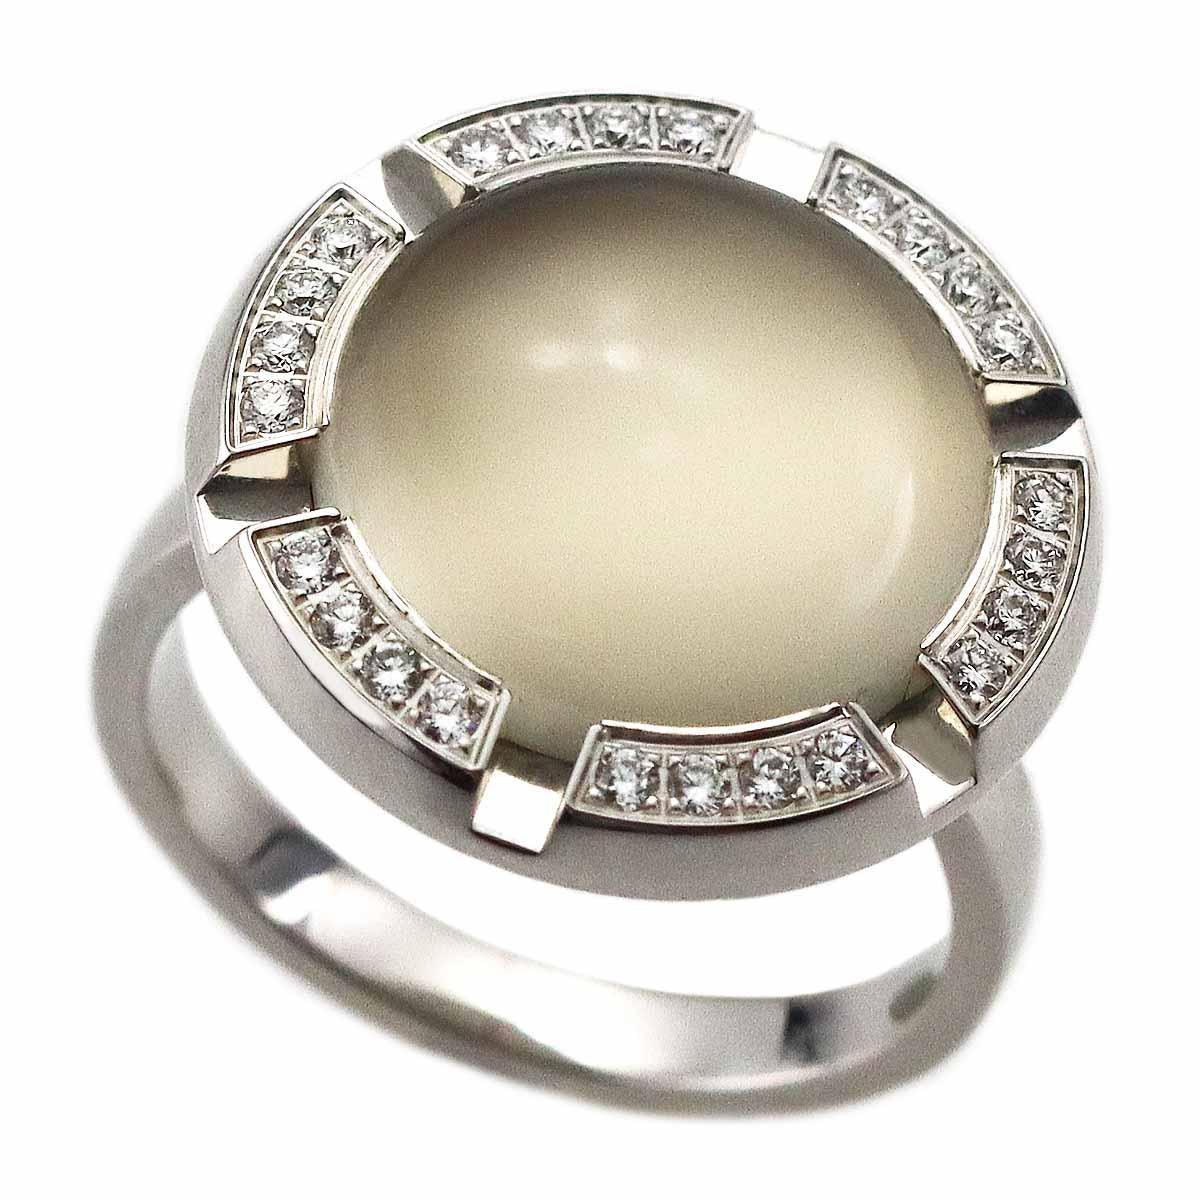 Brand:CHAUMET
Name:Class one XL Croisière ring
Material:Moonstone, diamonds, 750 K18 WG white gold
Weight:9.0g（Approx)
Ring size:British & Australian:L 1/4  /   US & Canada:5.5 /  French & Russian:51 /  German:16.2 /  Japanese:  11 /Swiss: